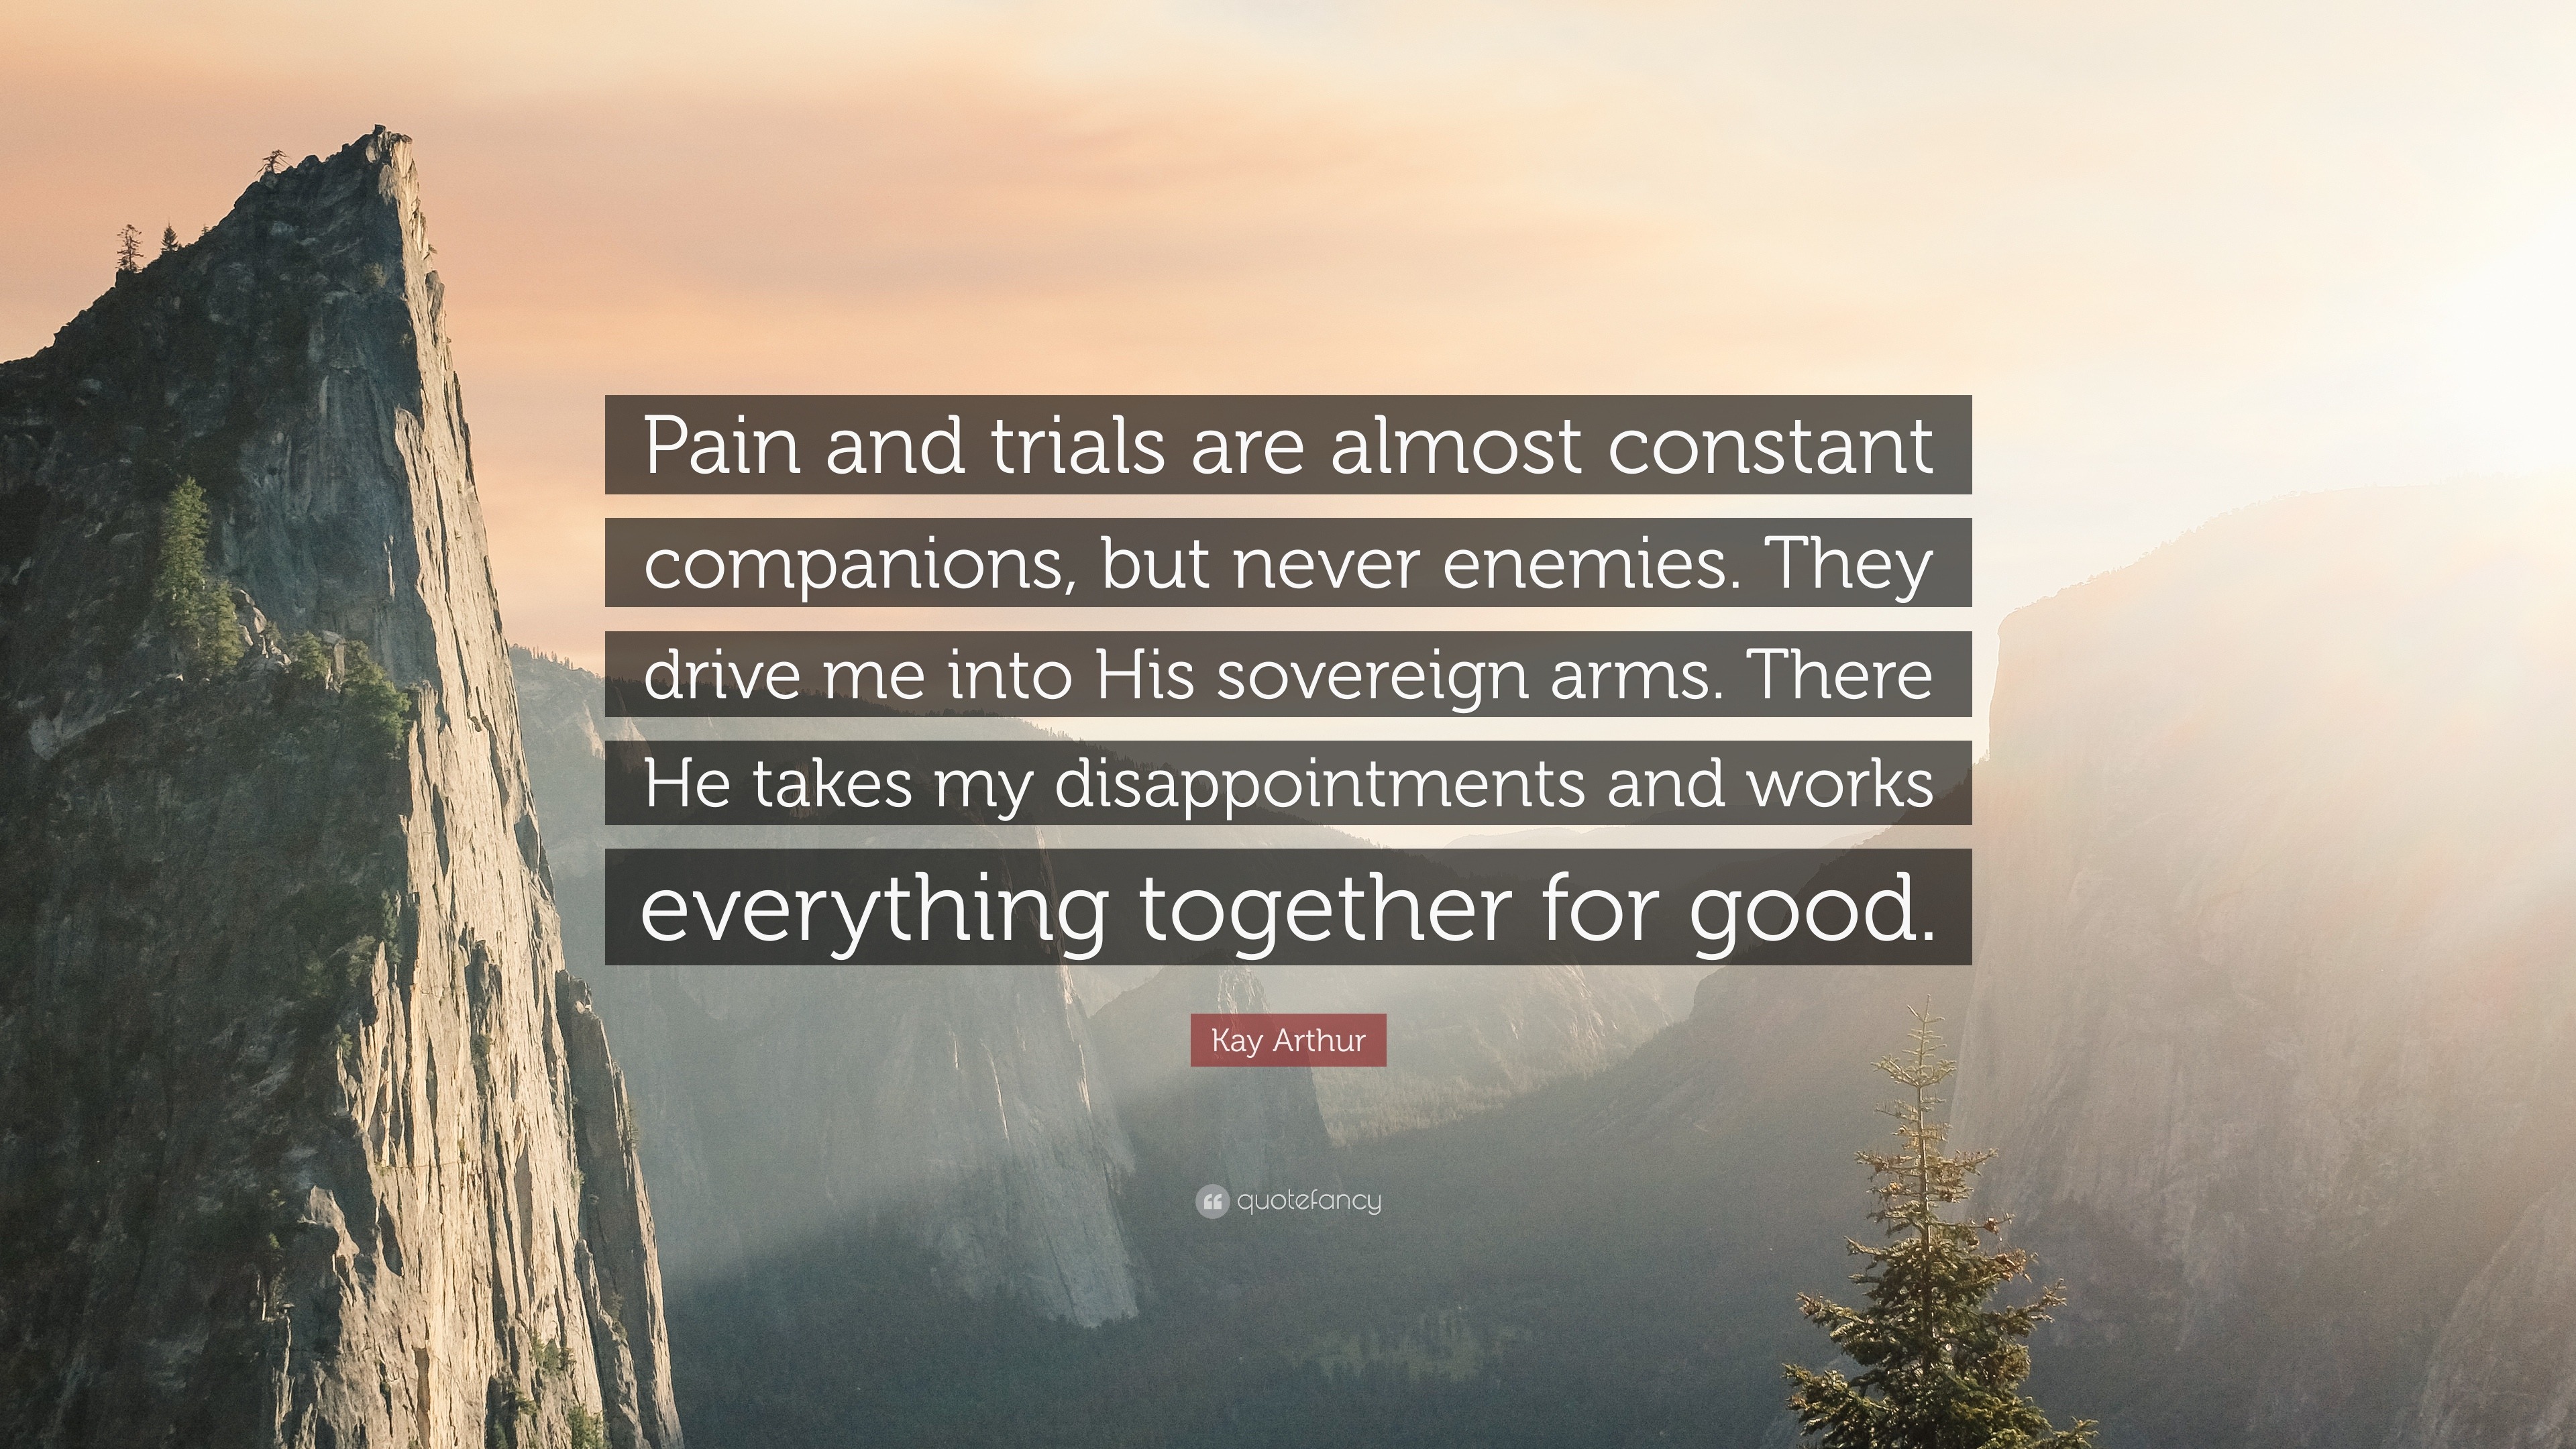 Kay Arthur Quote “pain And Trials Are Almost Constant Companions But Never Enemies They Drive